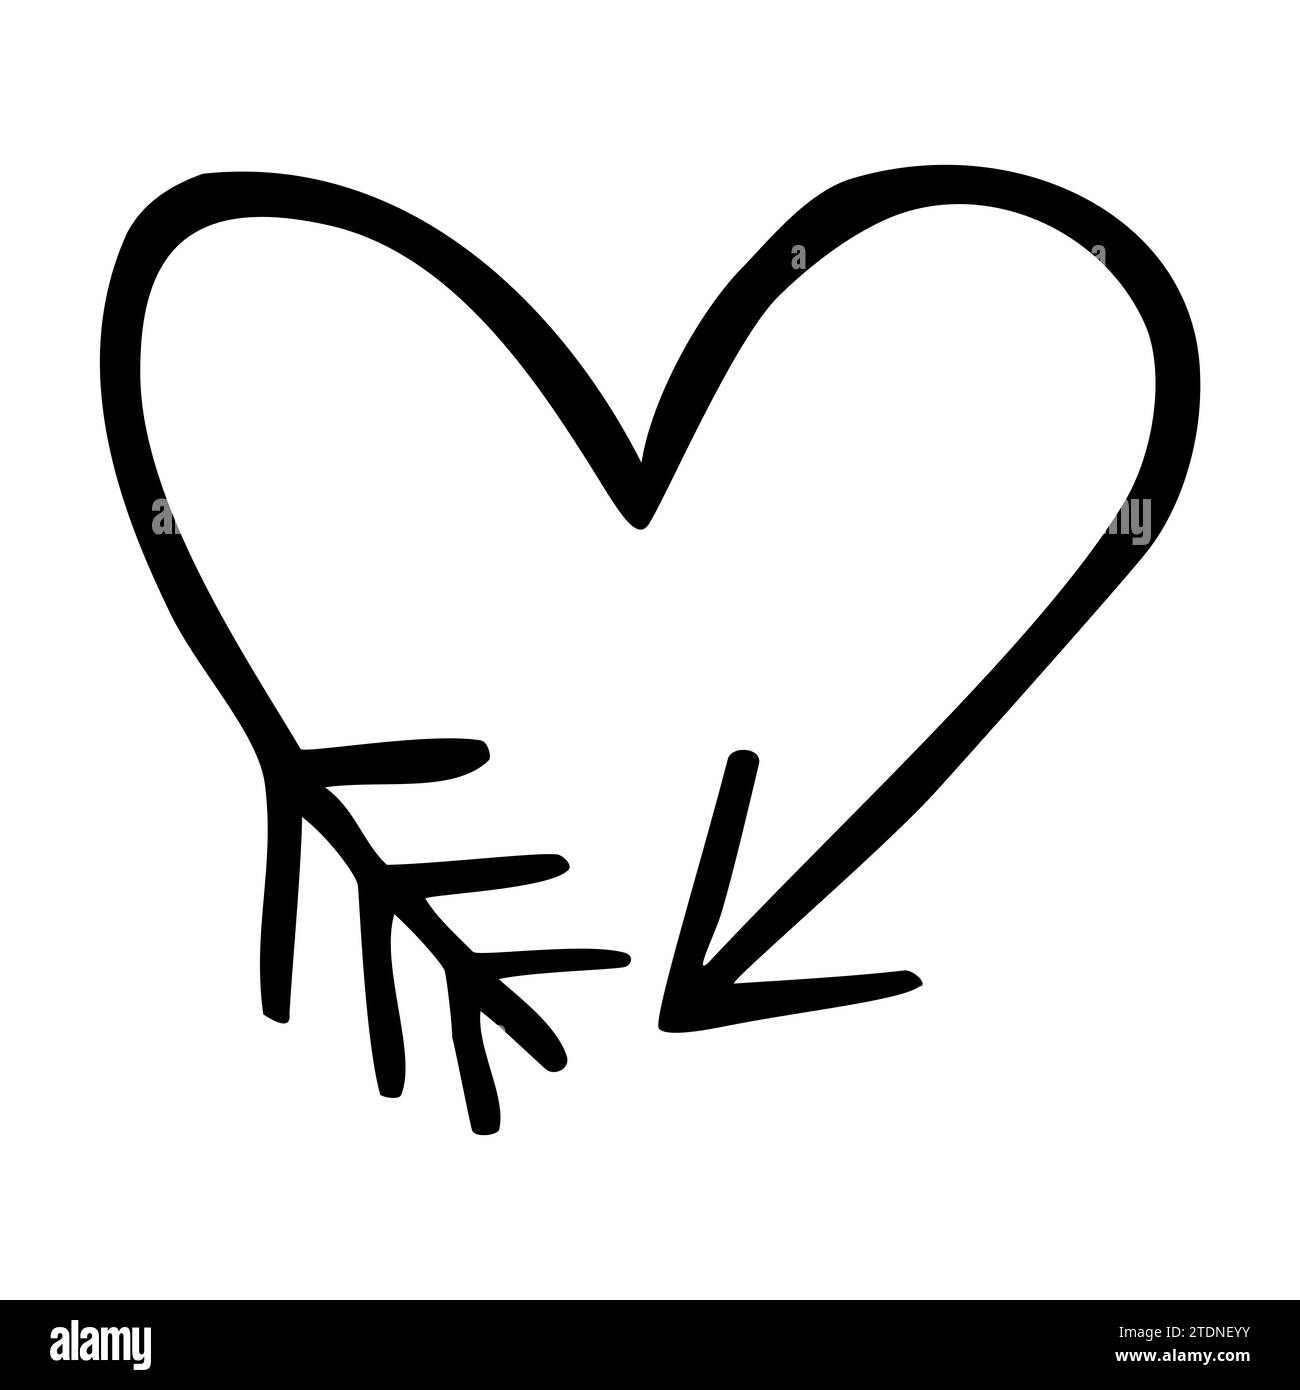 Doodle heart shaped arrow symbol hand drawn with thin line. Graphic ...